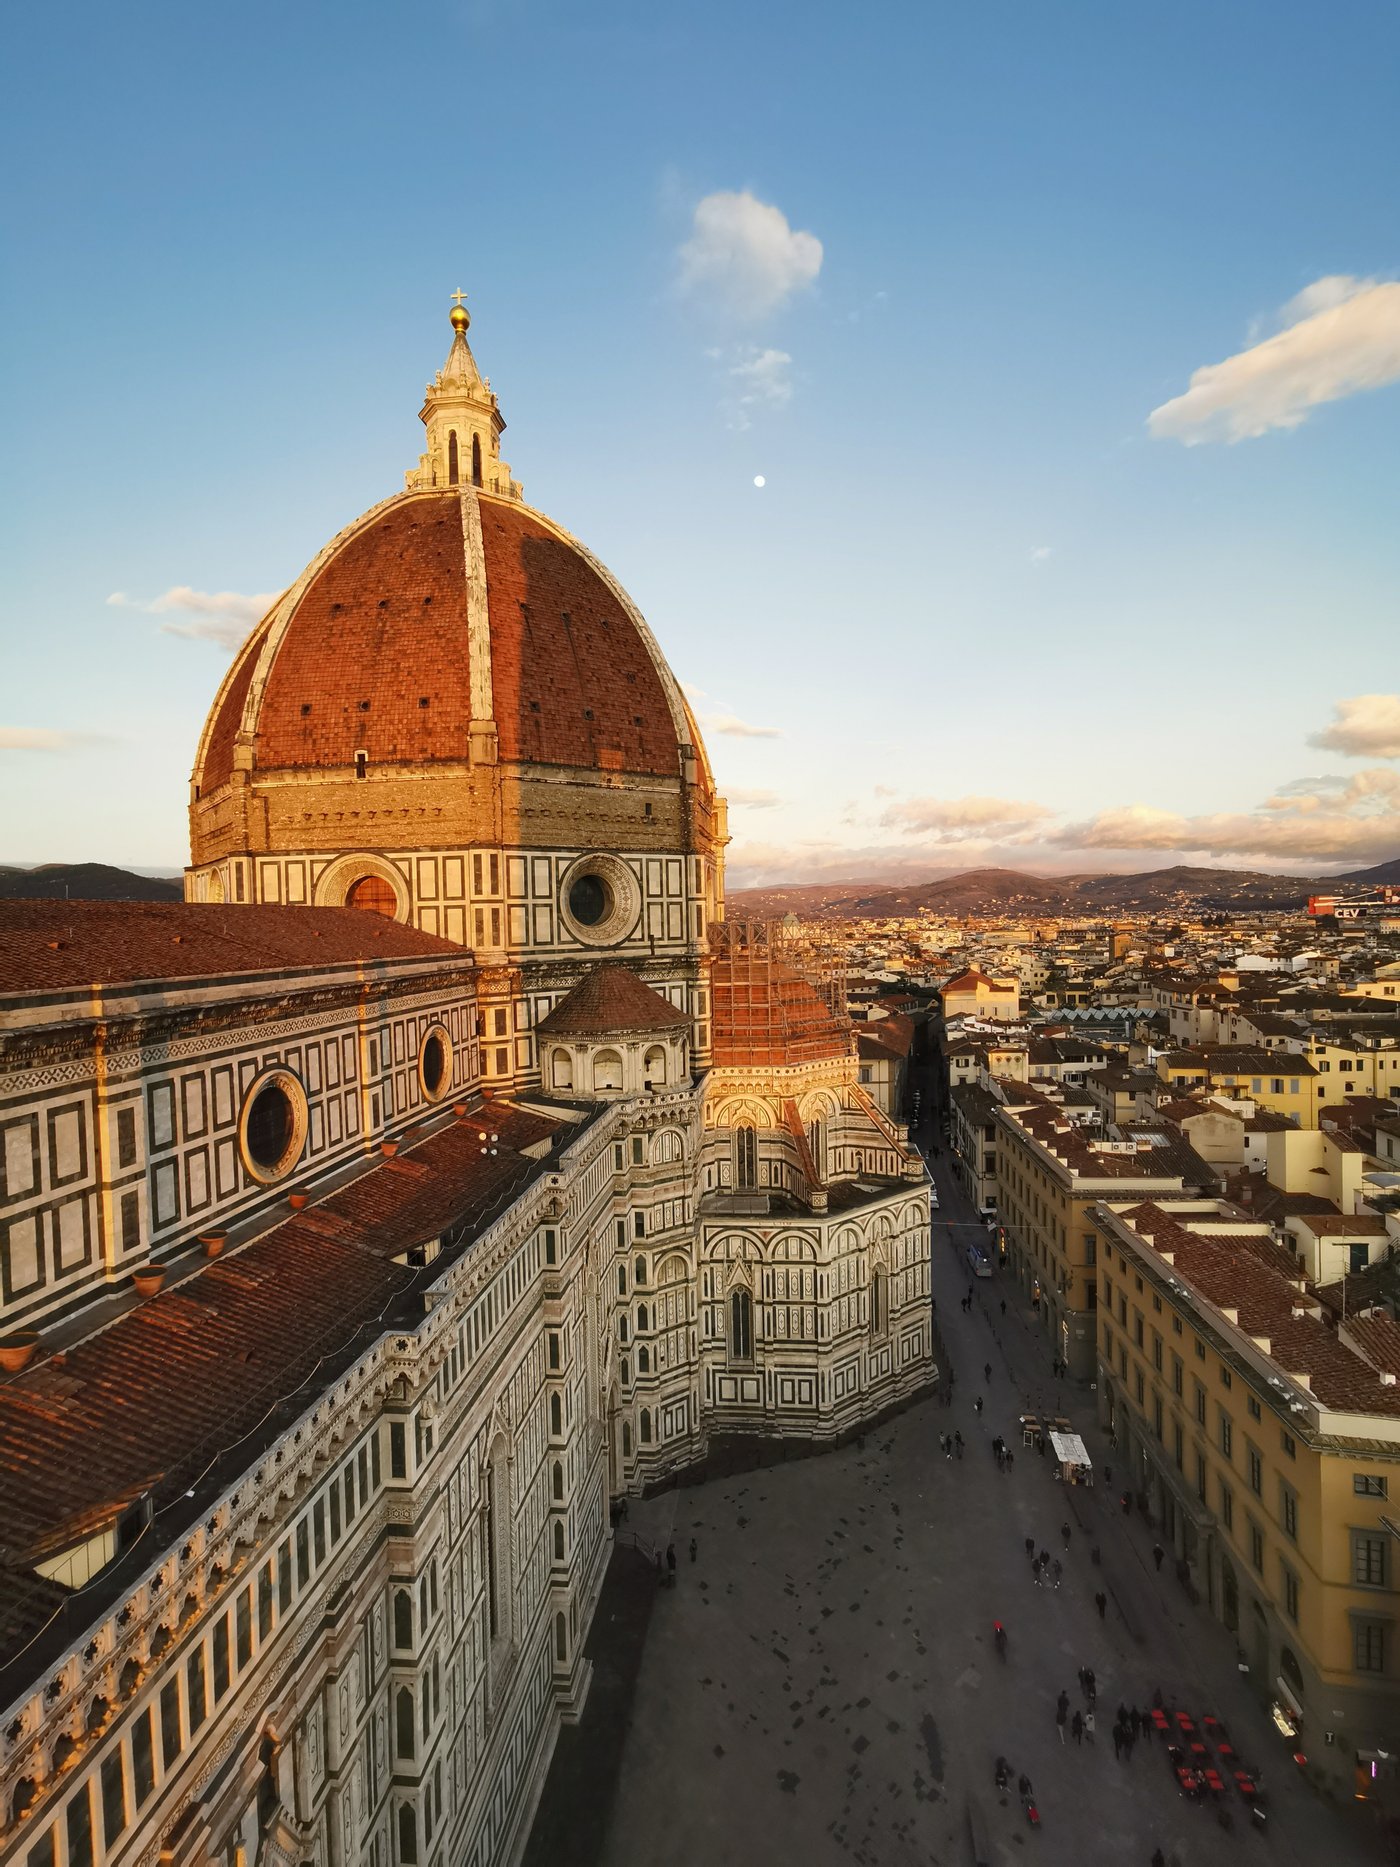 The picture shows the dome of the Cathedral of Santa Maria del Fiore in Florence.